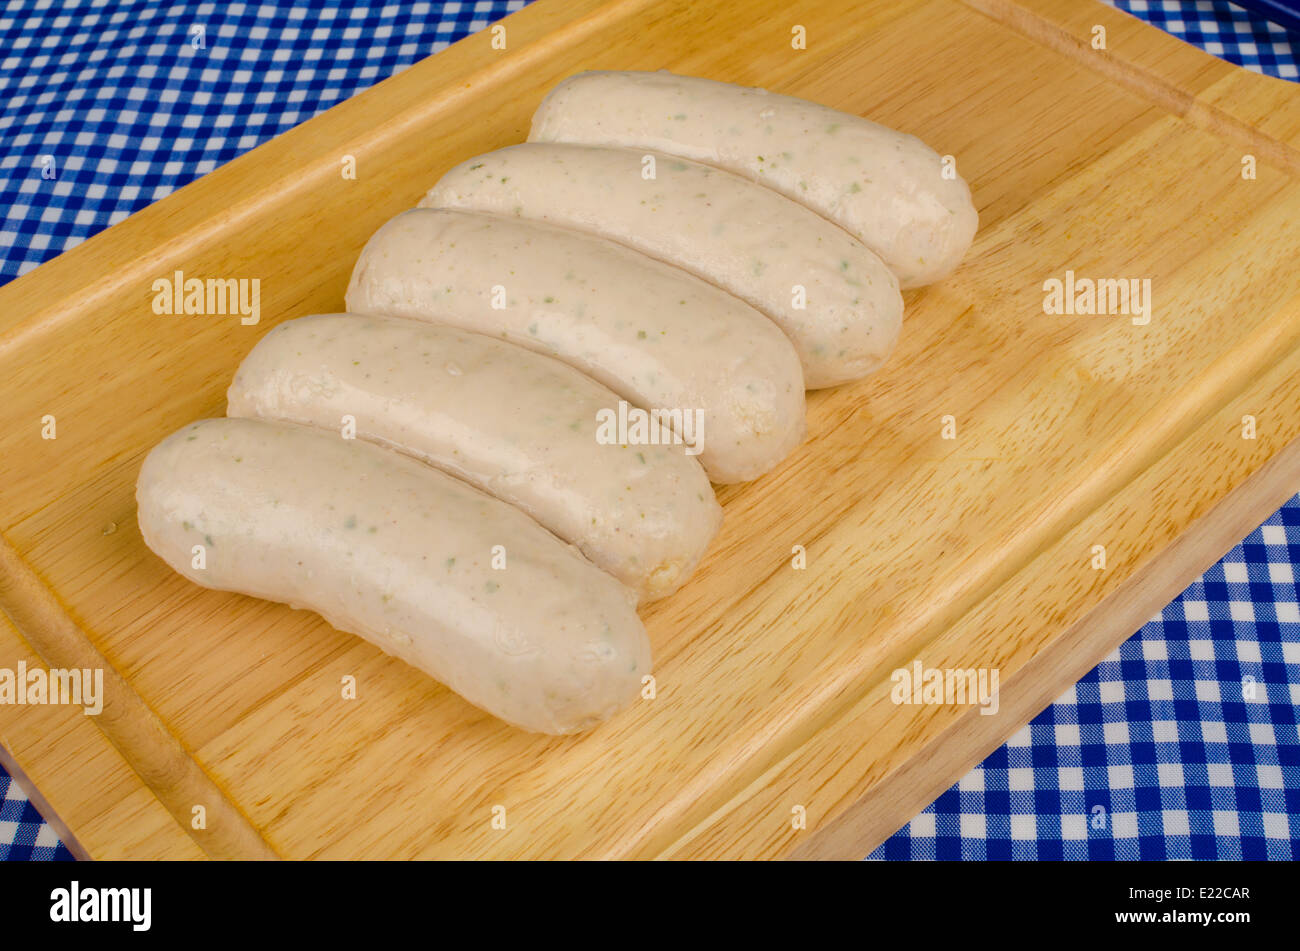 Several German Bratwurst sausages on a wooden chopping board Stock Photo